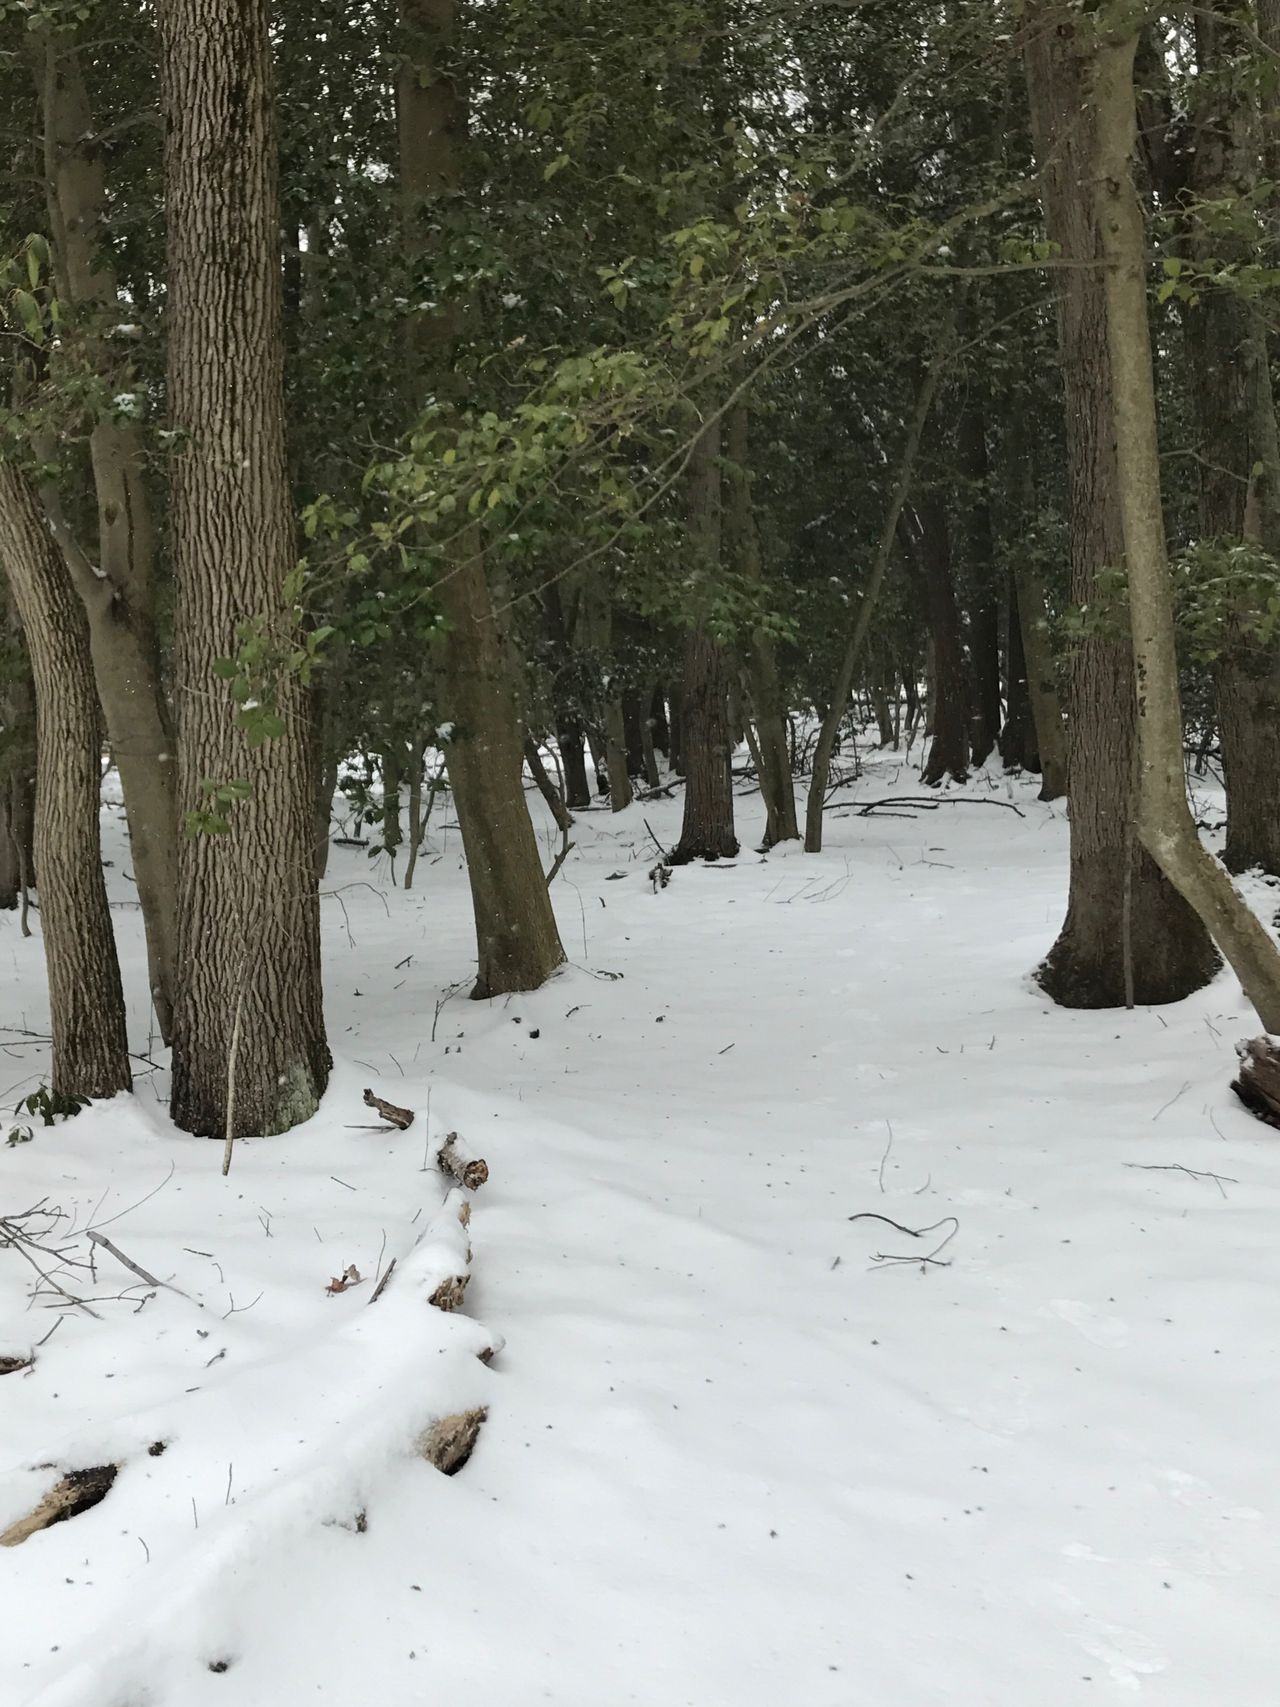 Snow covered woods